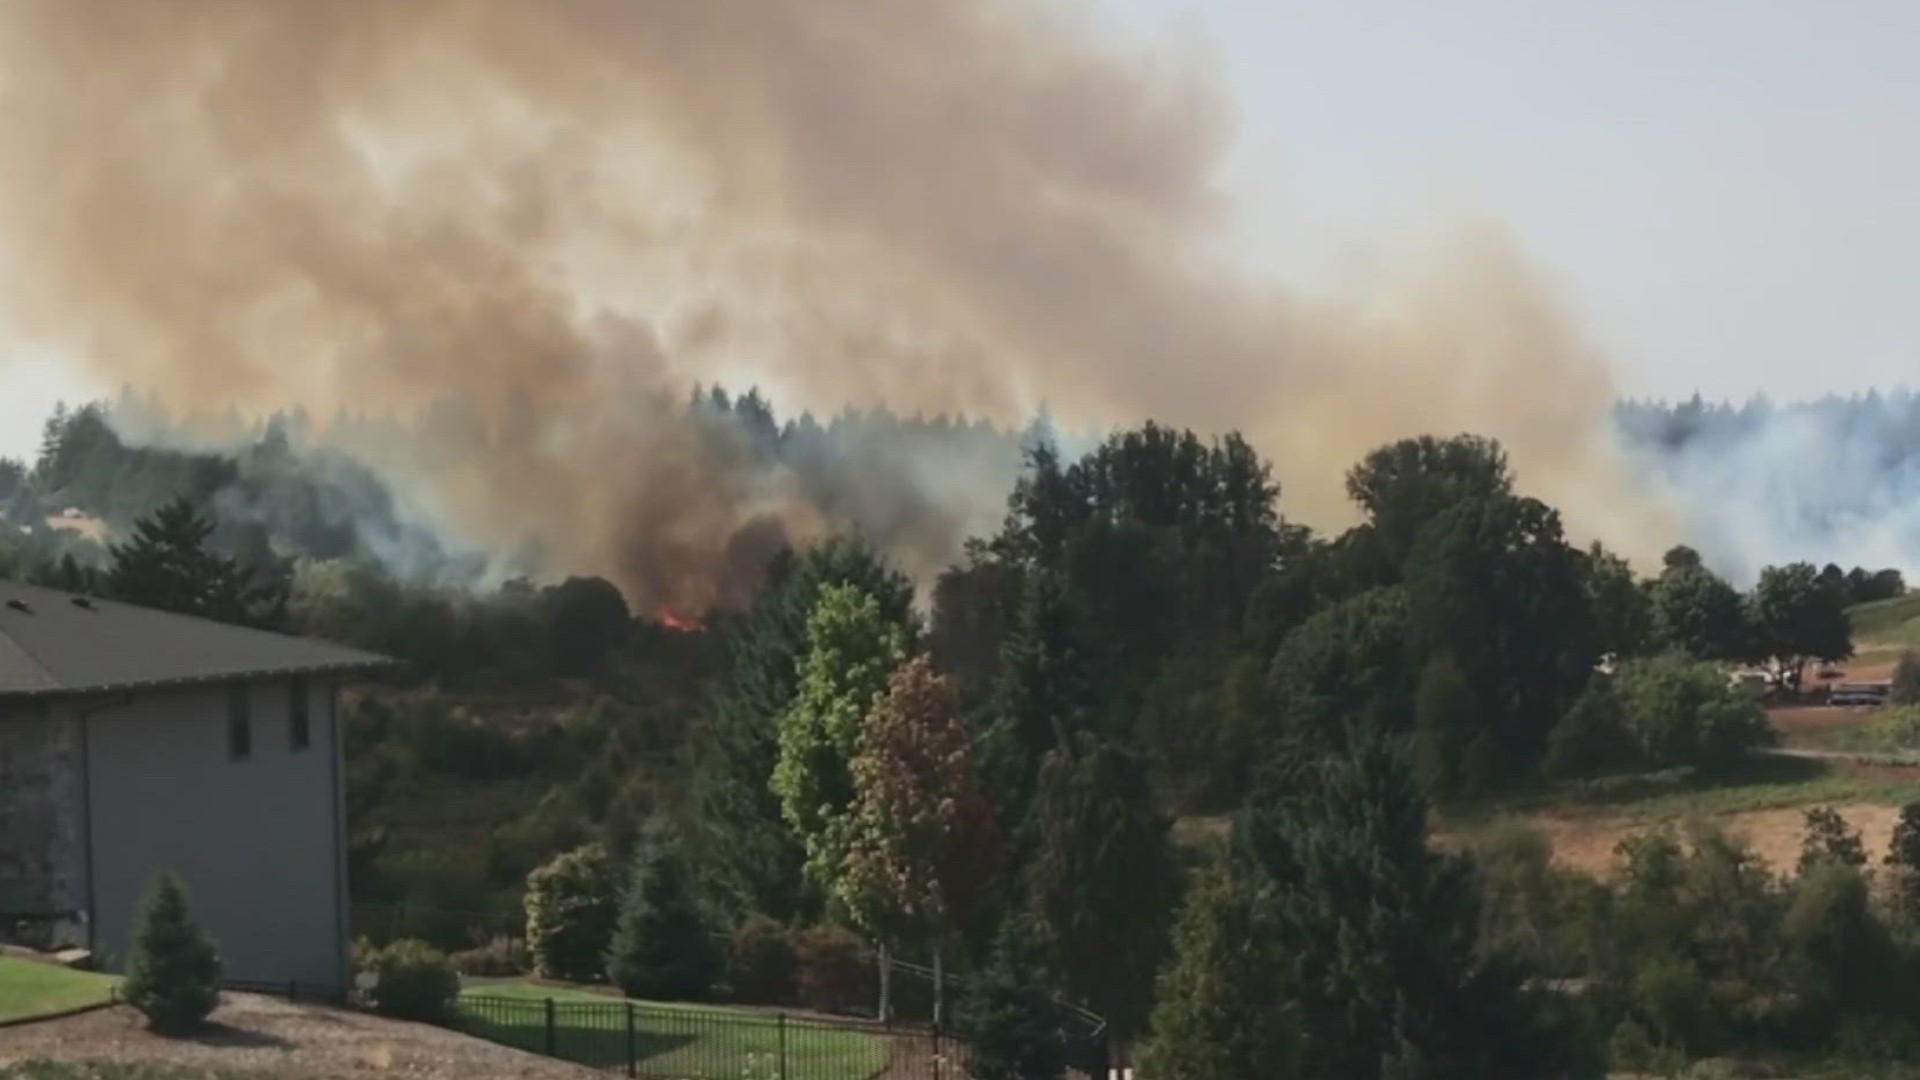 A fire burning on the south side of Salem is prompting Level 3 'Go Now' evacuations for people living west of Liberty Road South and Jory Hill Road.